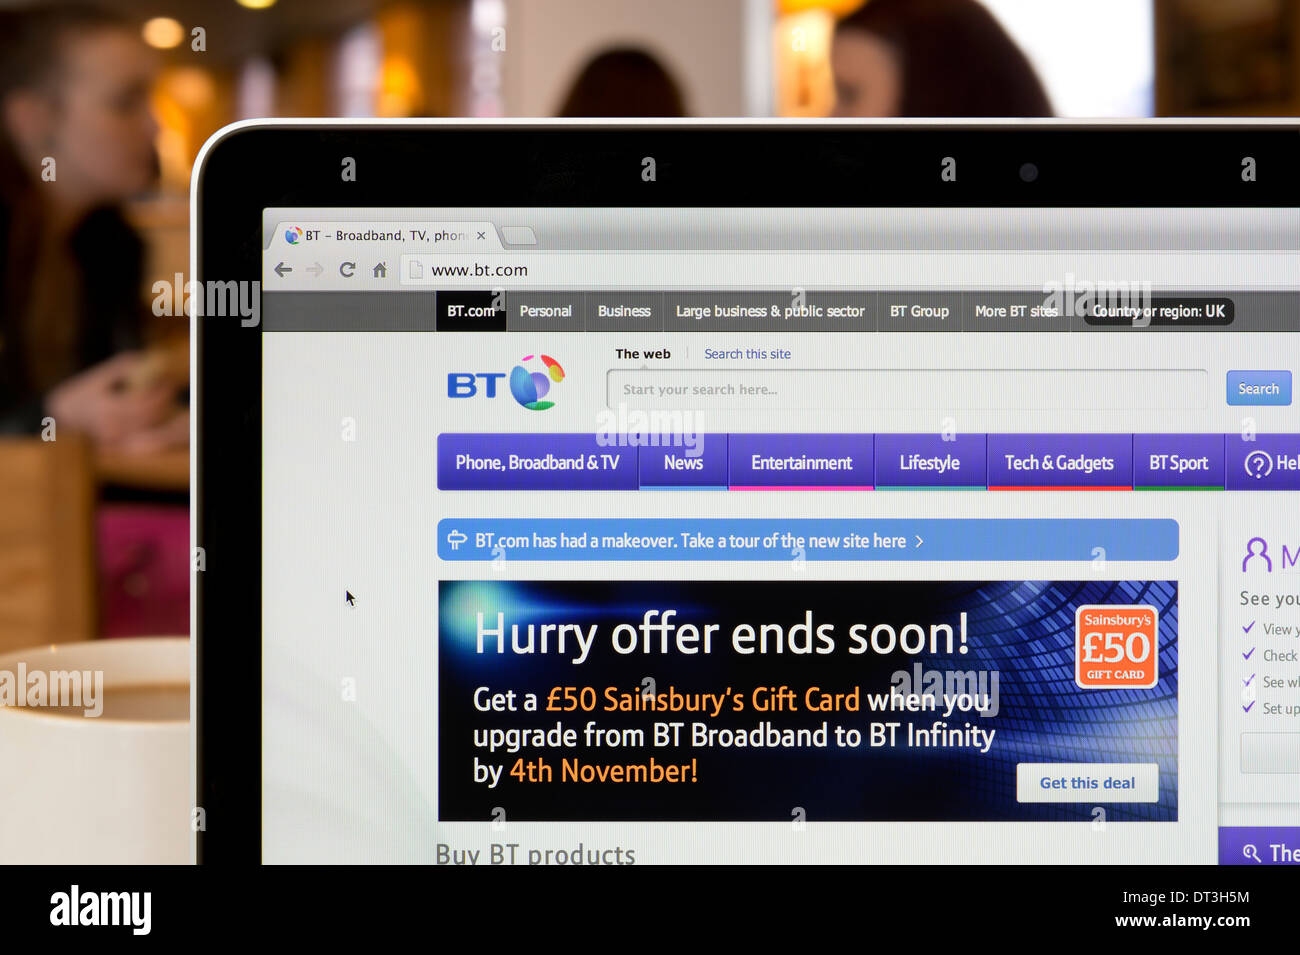 The BT website shot in a coffee shop environment (Editorial use only: print, TV, e-book and editorial website). Stock Photo